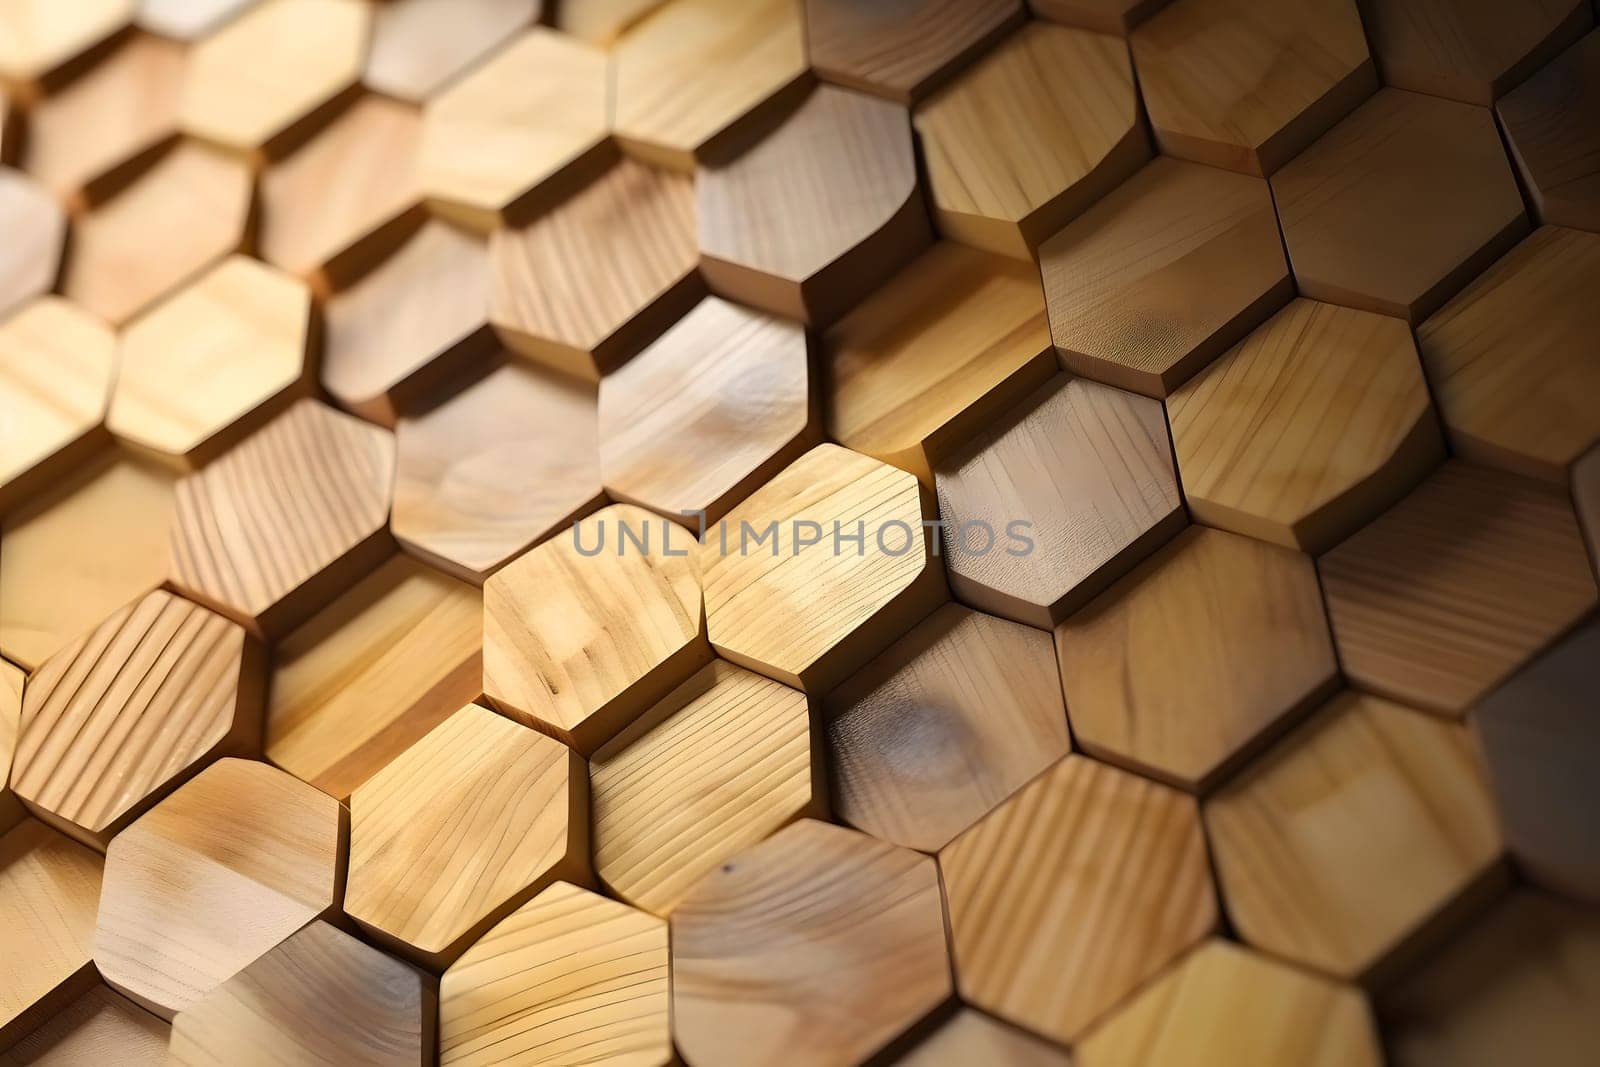 Closeup full-frame background of tiled hexagonal wooden dowel ends. Neural network generated in May 2023. Not based on any actual person, scene or pattern.